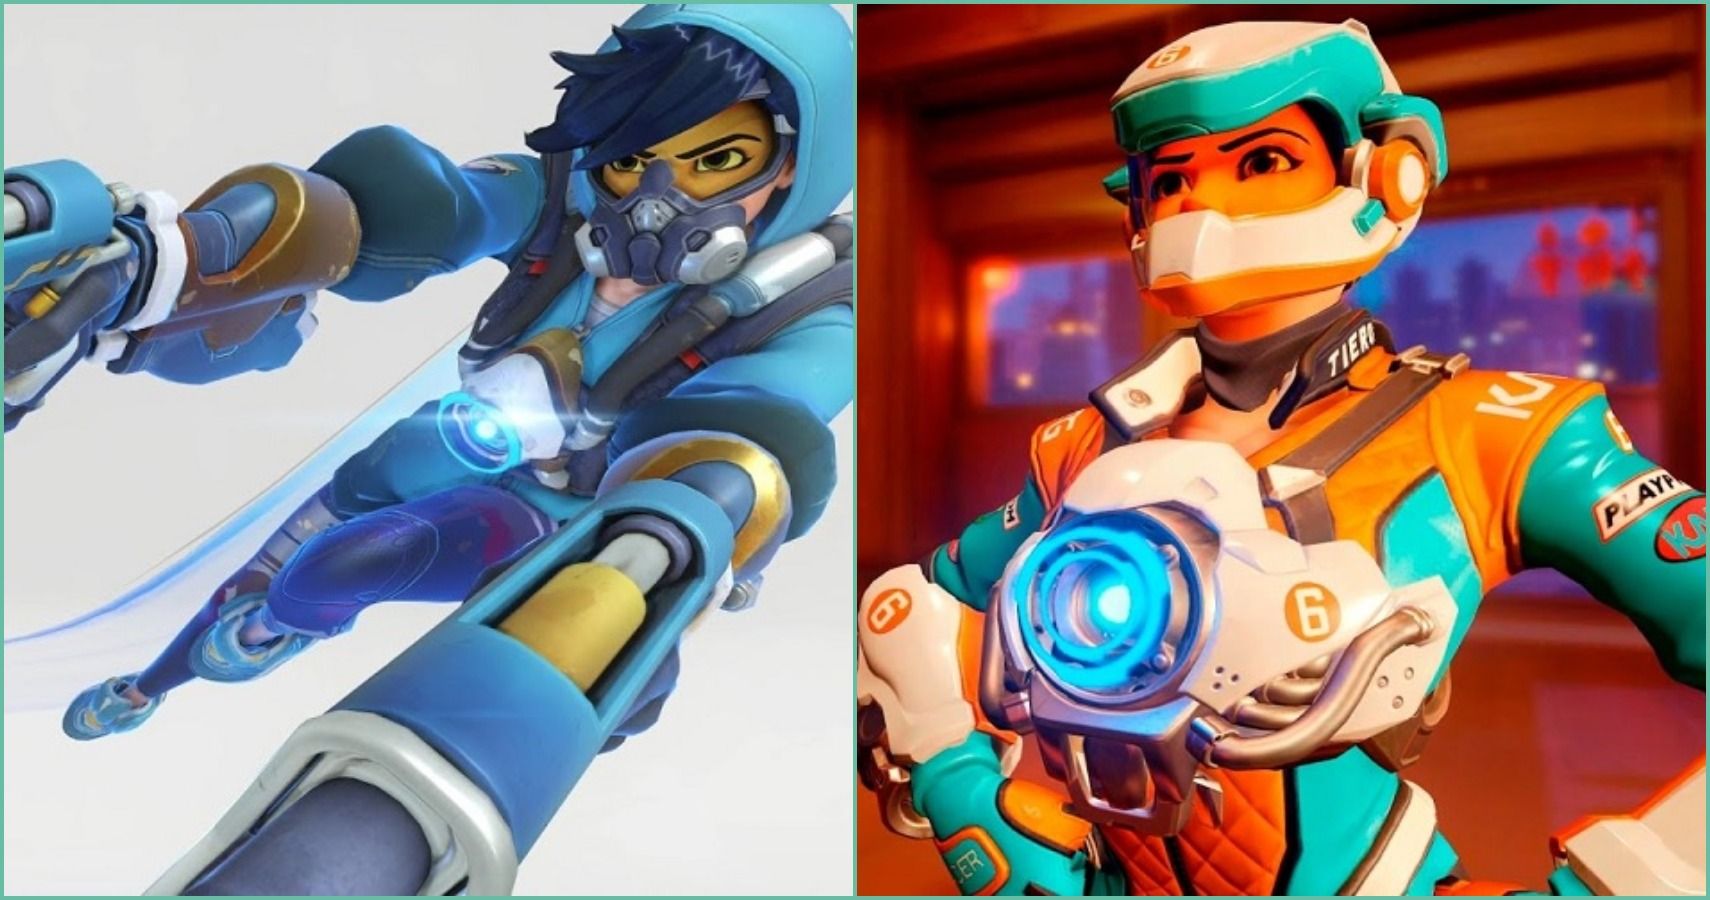 The Best Tracer Skins In The 'Overwatch' Series, Ranked